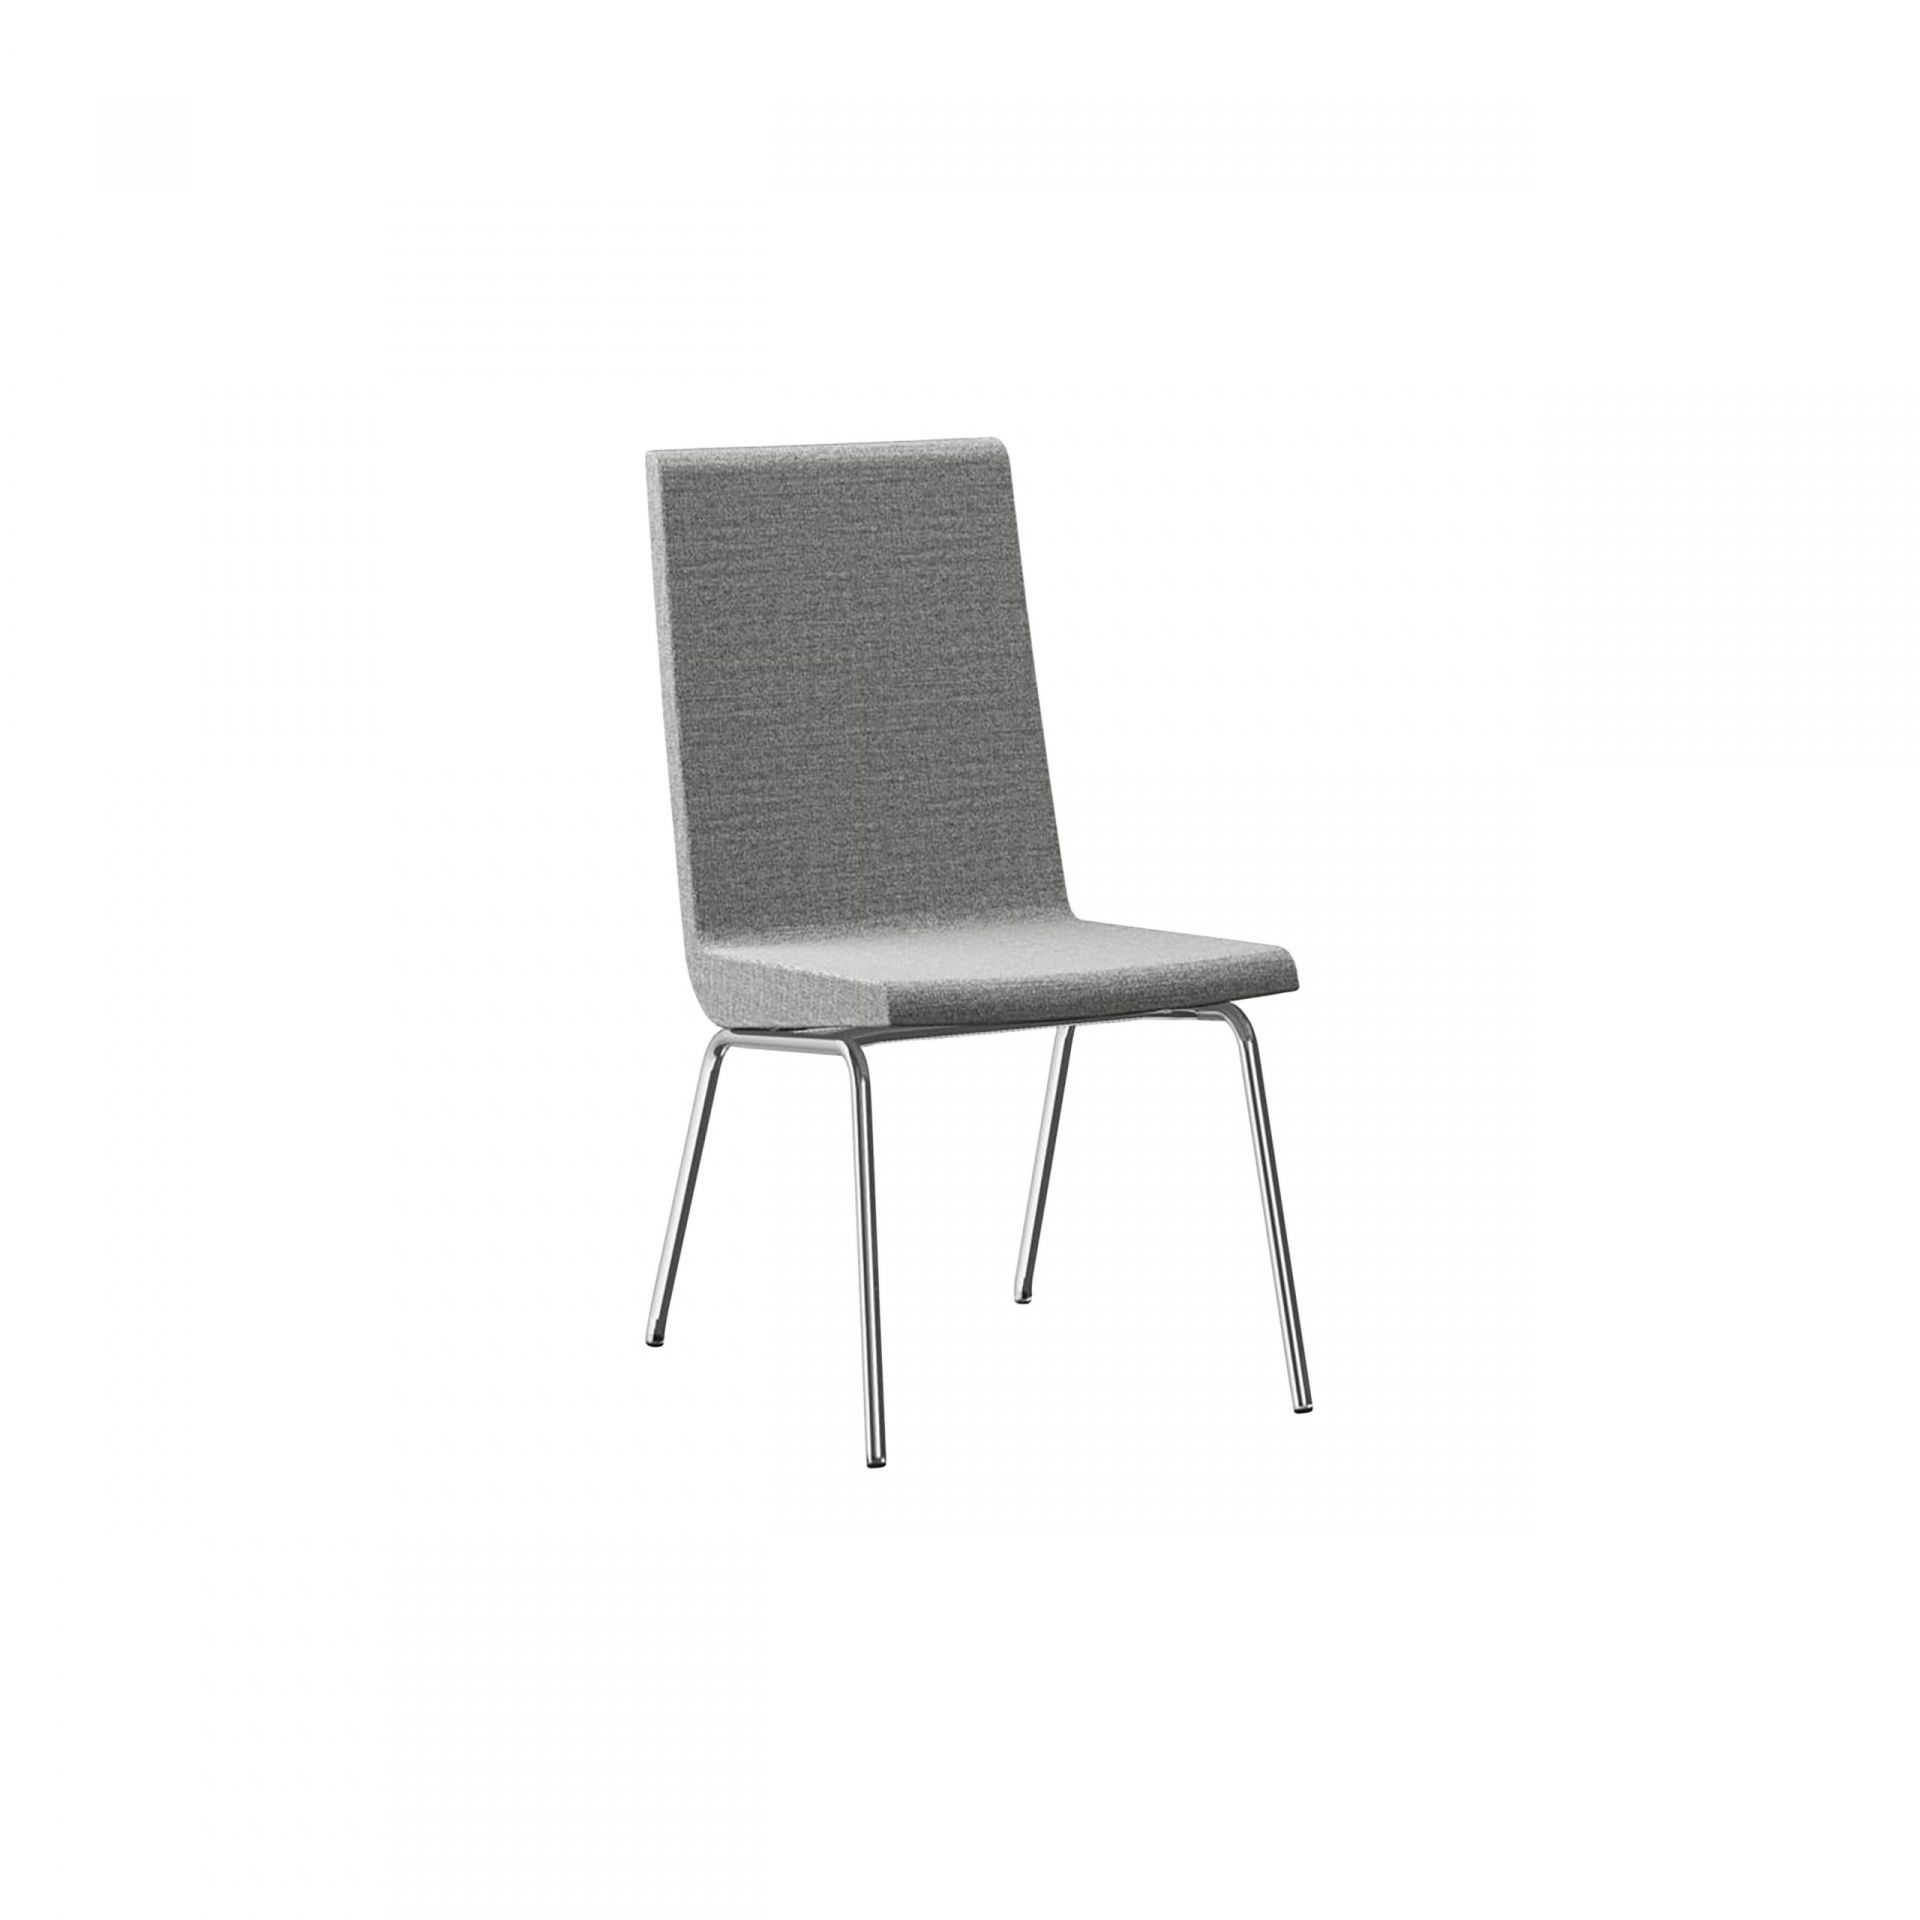 Woods Chair with metal legs product image 1